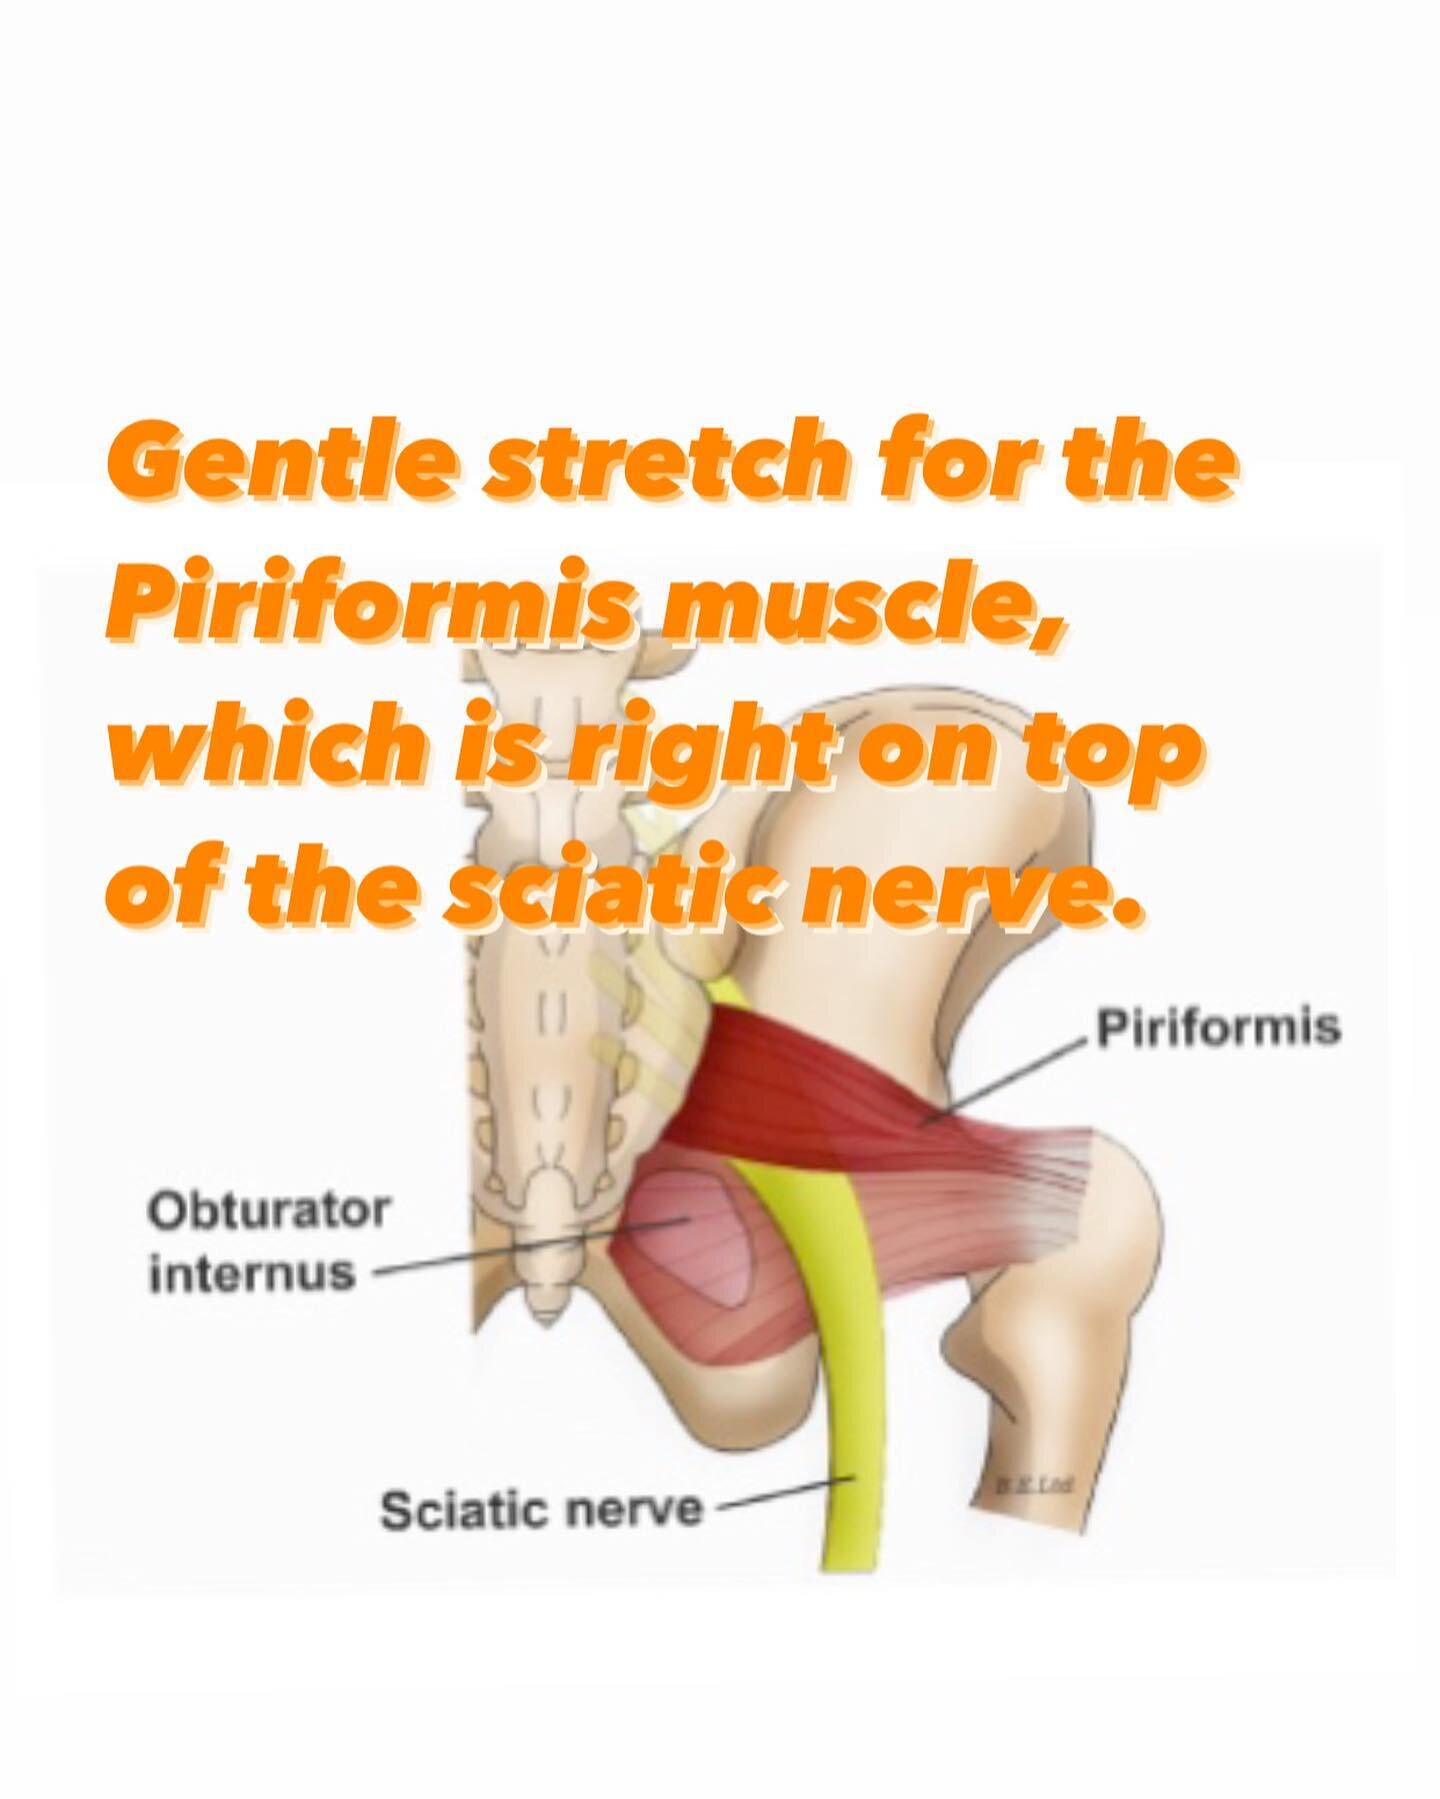 Stretch the Piriformis Muscle 🧜🧜&zwj;♂️
The piriformis is a small muscle located deep in the buttock, behind the gluteus maximus. It runs right on top of the sciatic nerve, sandwiching the nerve between it and the hip bone. This gentle stretch will